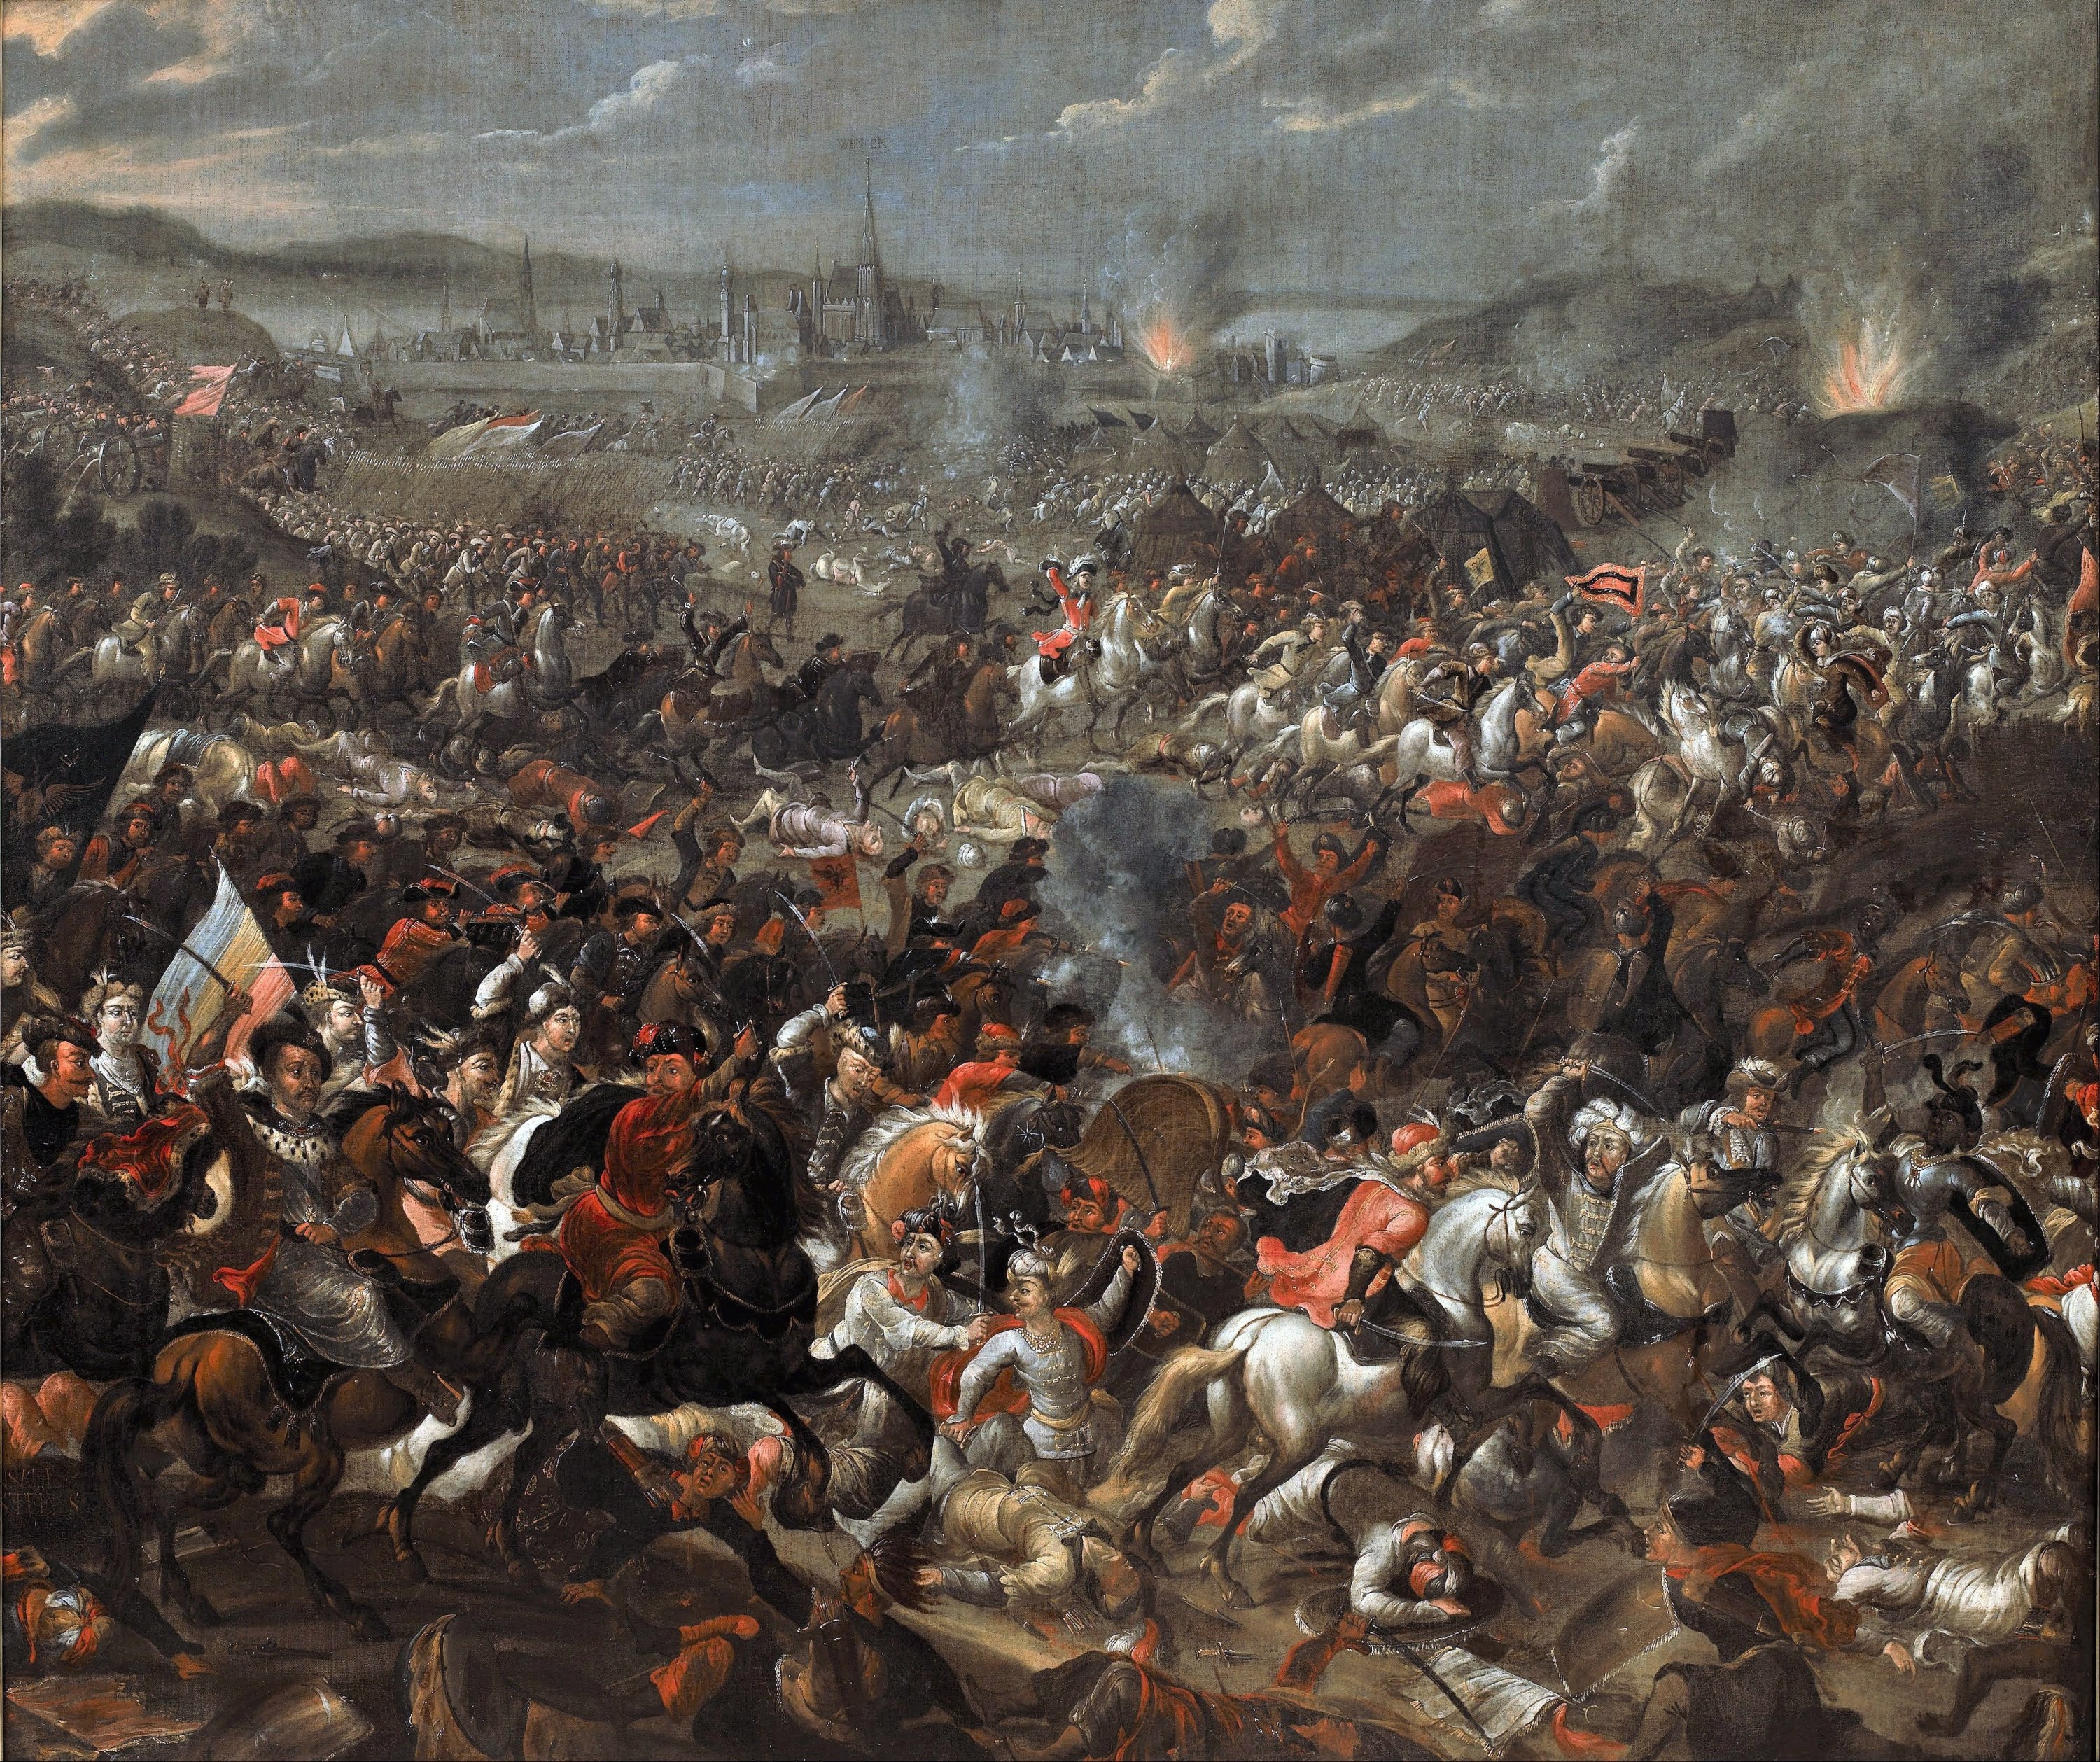 A depiction of the Battle of Vienna.